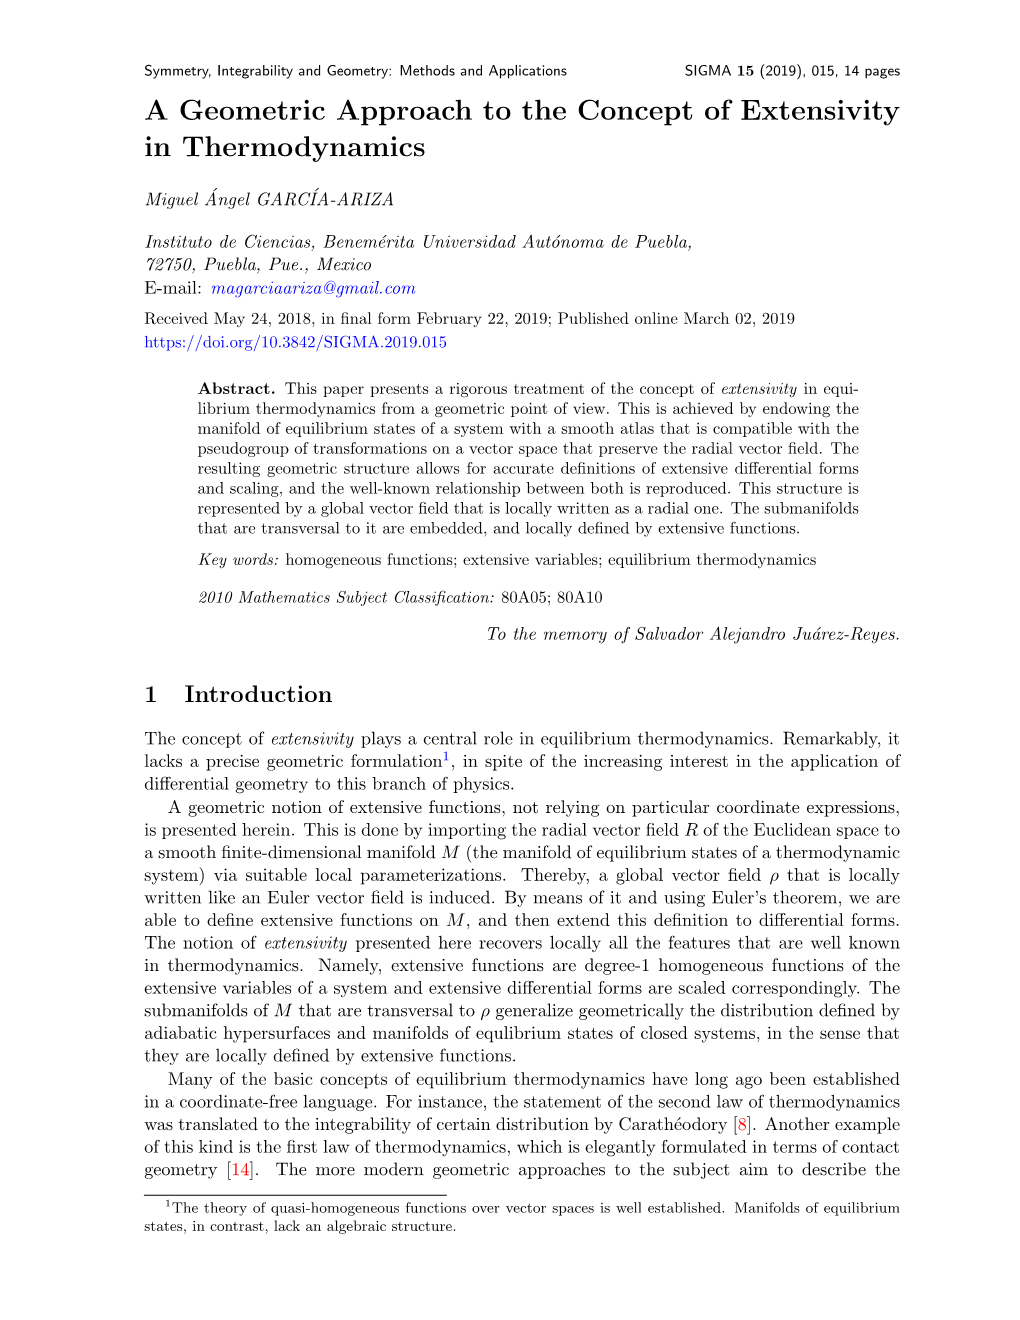 A Geometric Approach to the Concept of Extensivity in Thermodynamics